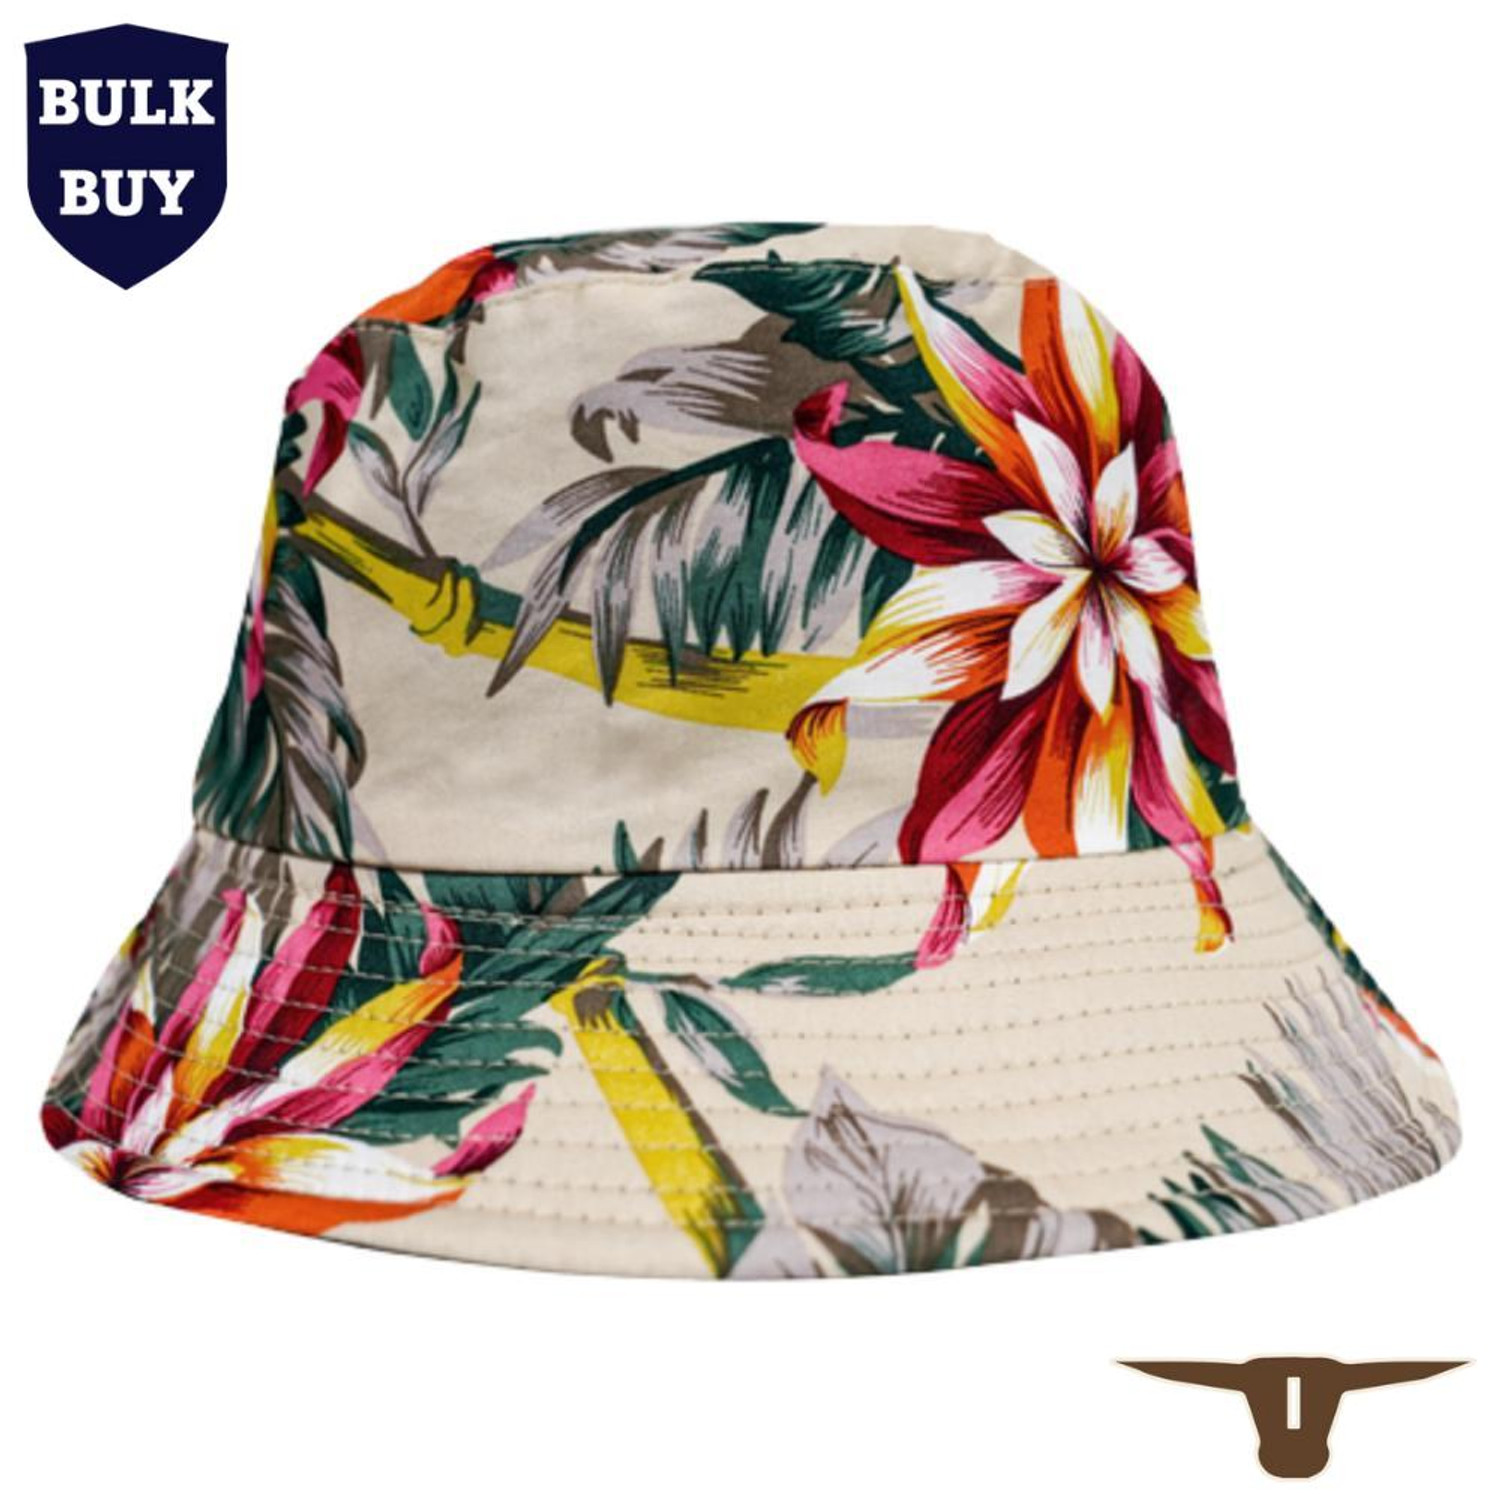  Born Out Here Bucket Hat (UR-51) (Bulk Deal, Buy 4+ for $24.95 each) 